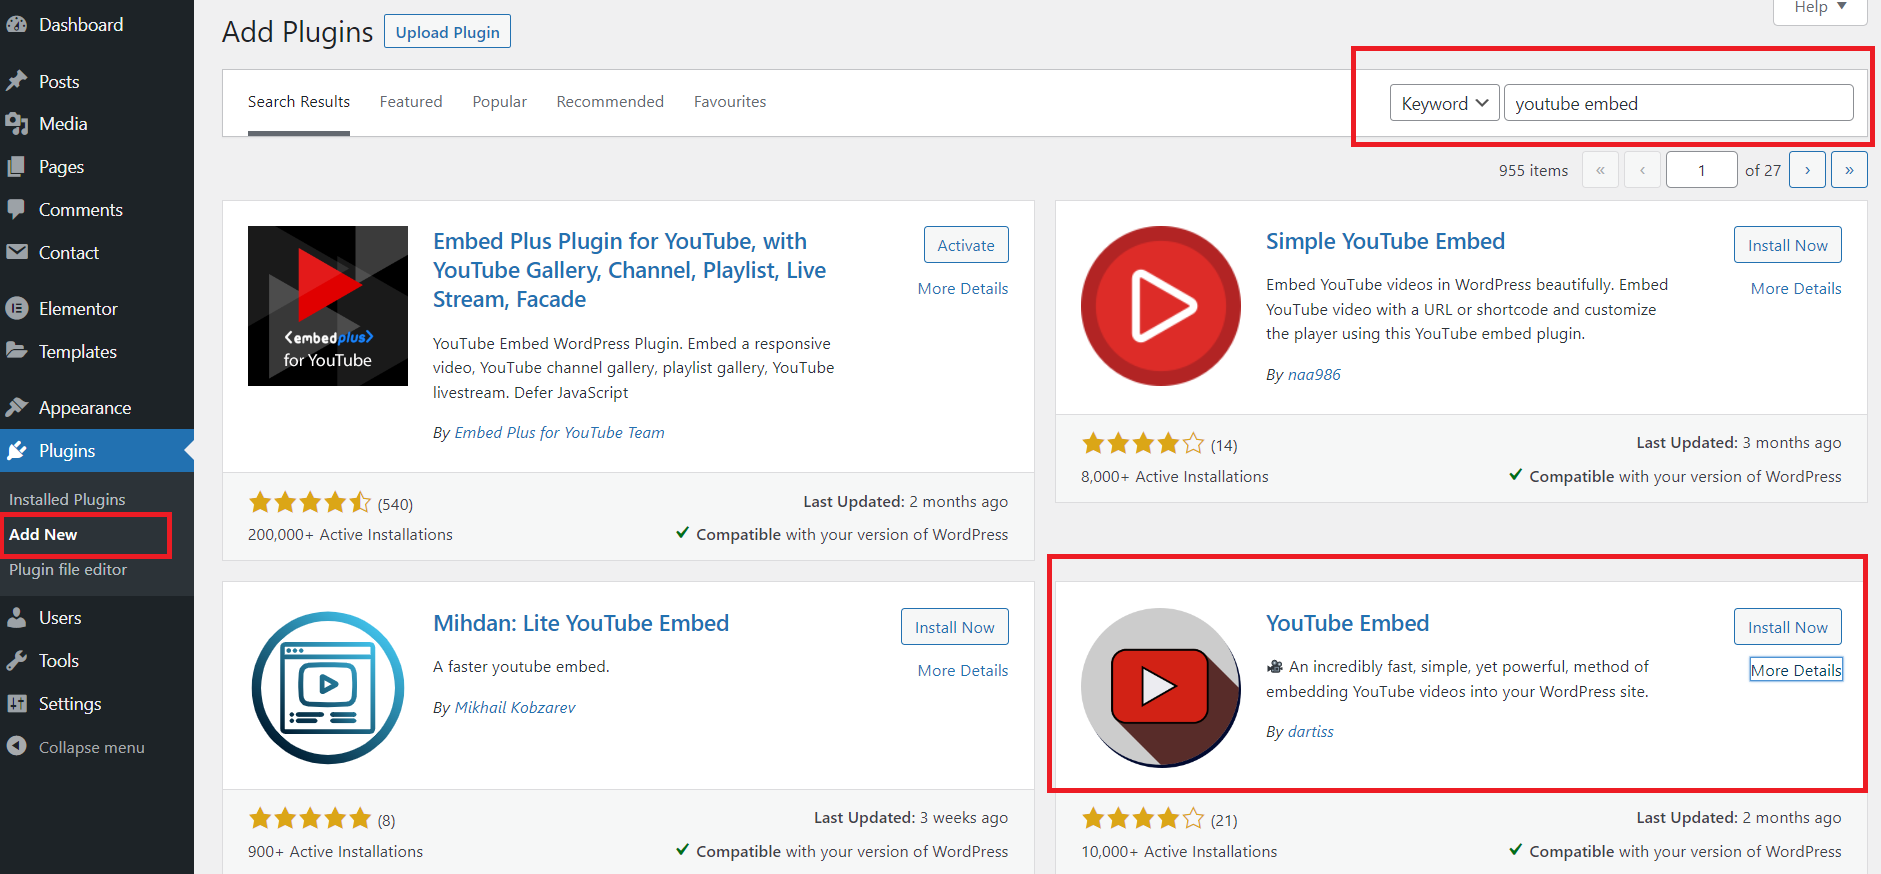 How To Embed YouTube Videos In WordPress Easily 